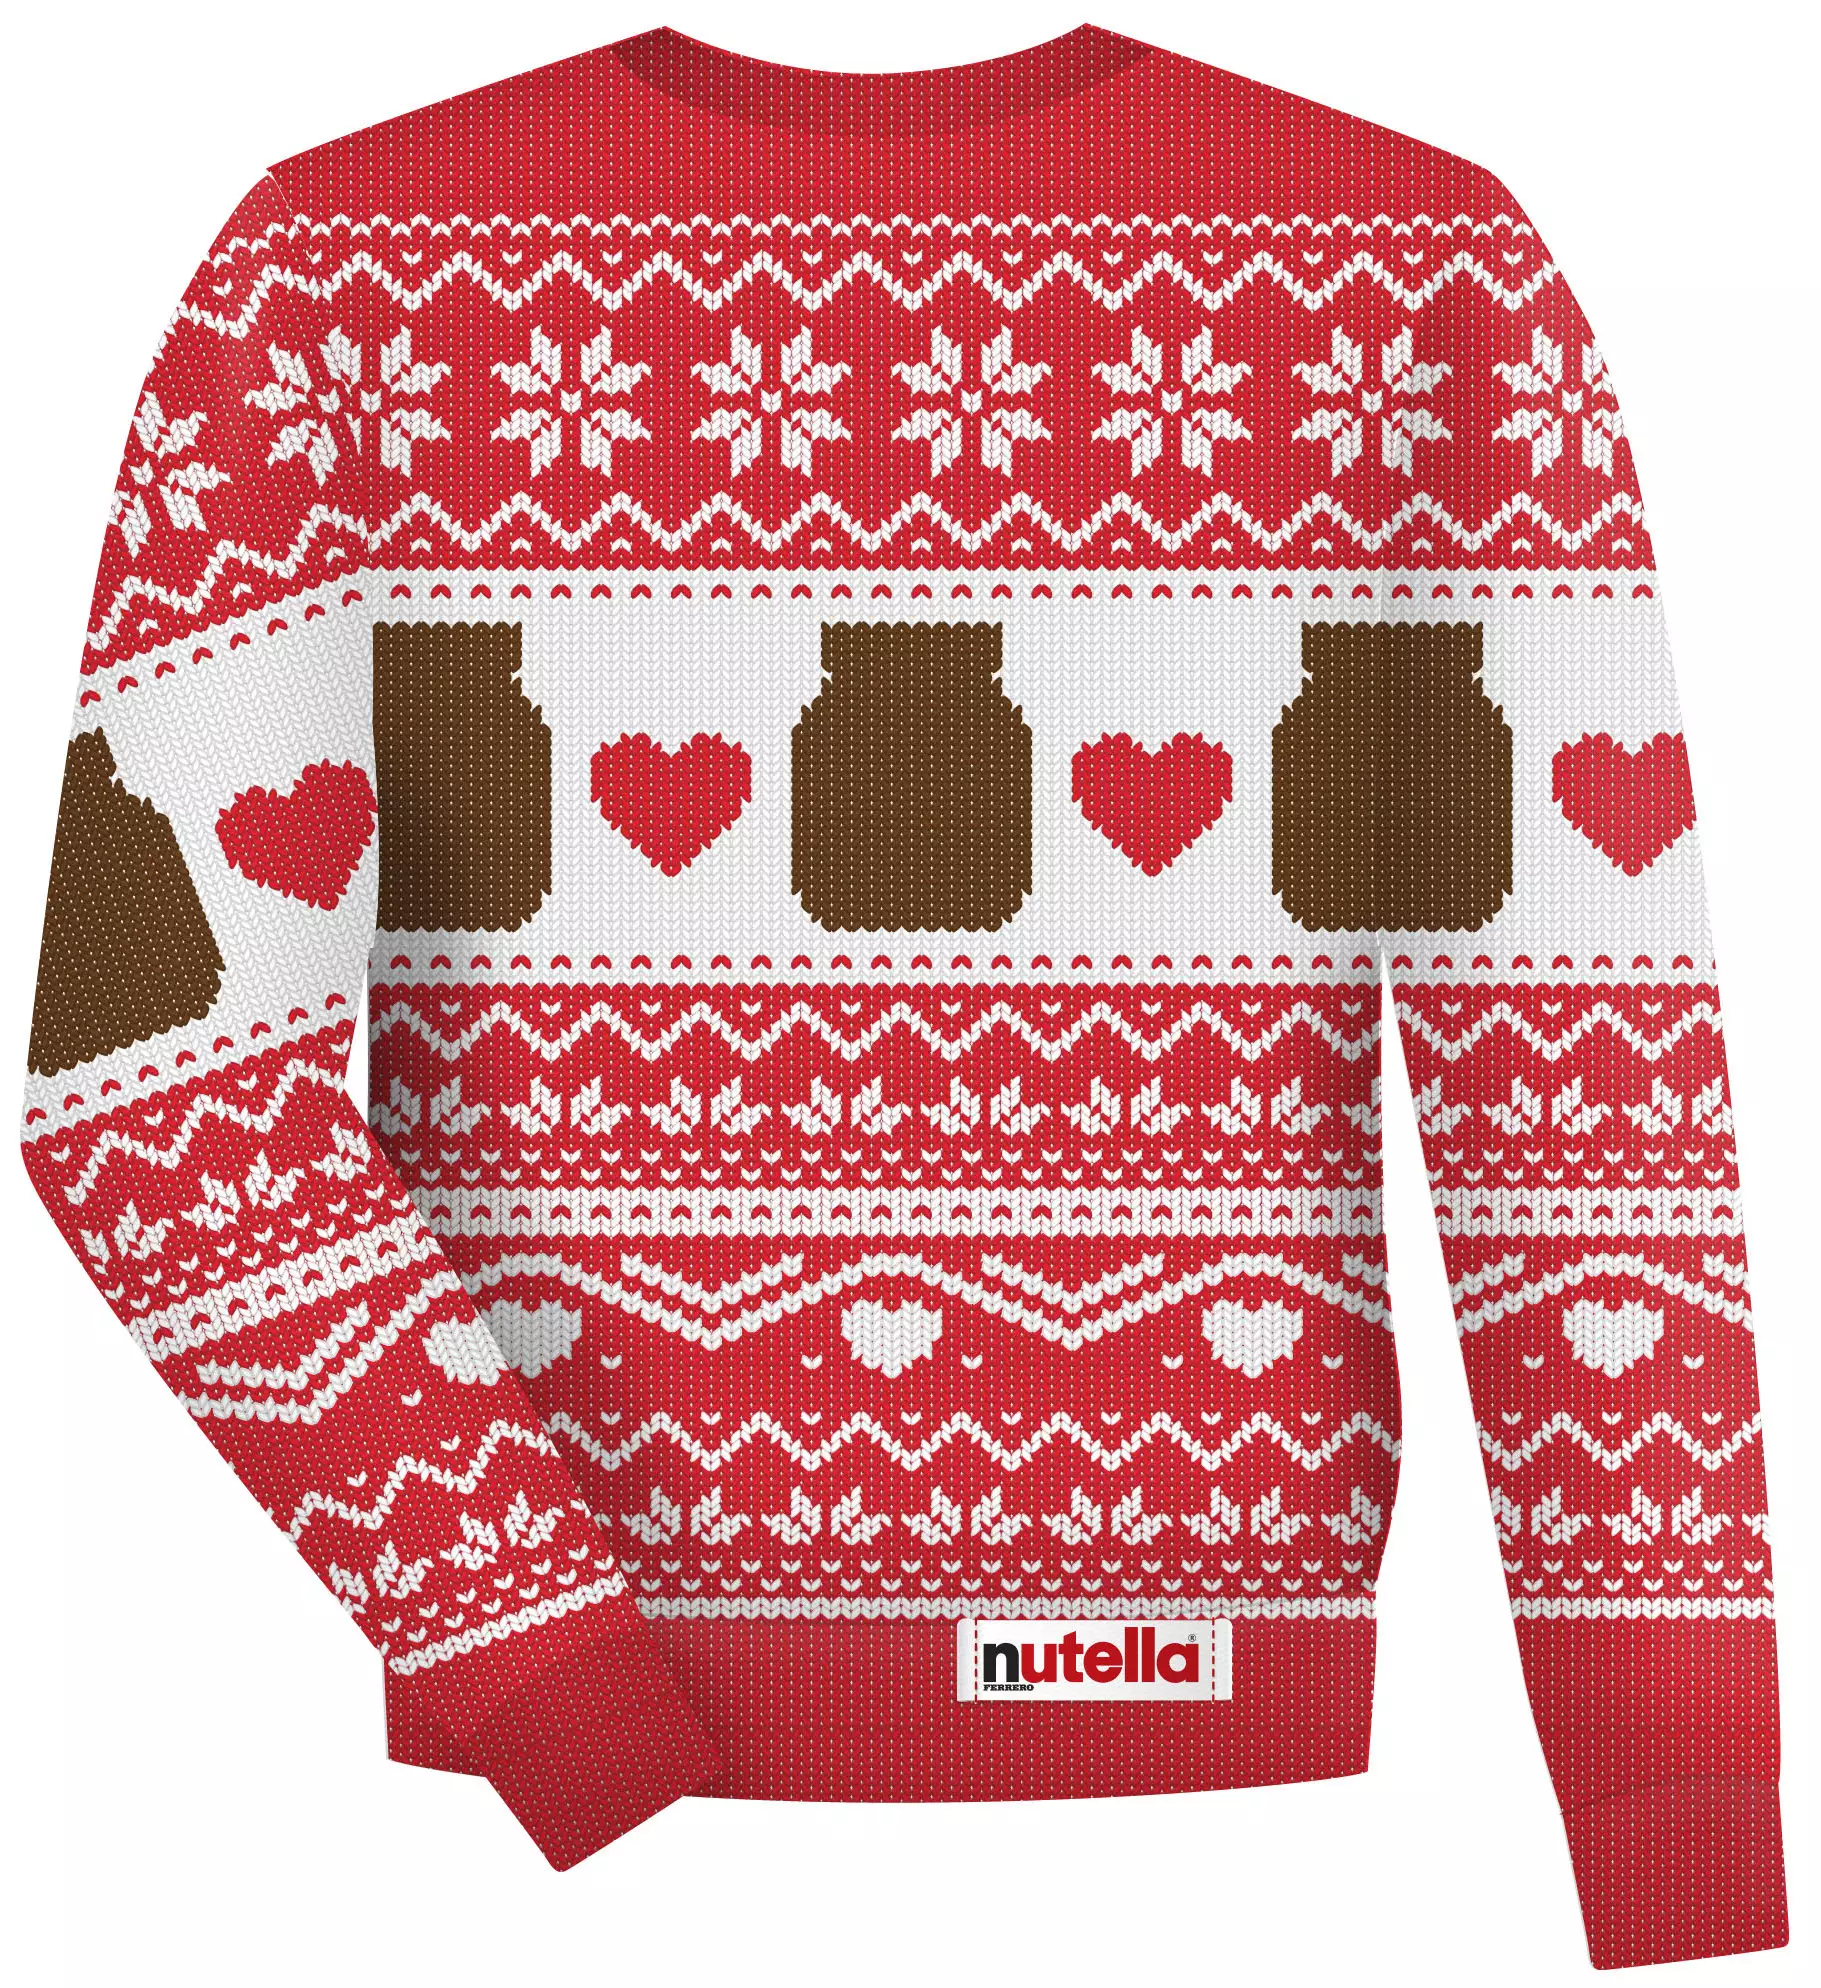 Nutella is giving away 200 of the jumpers (